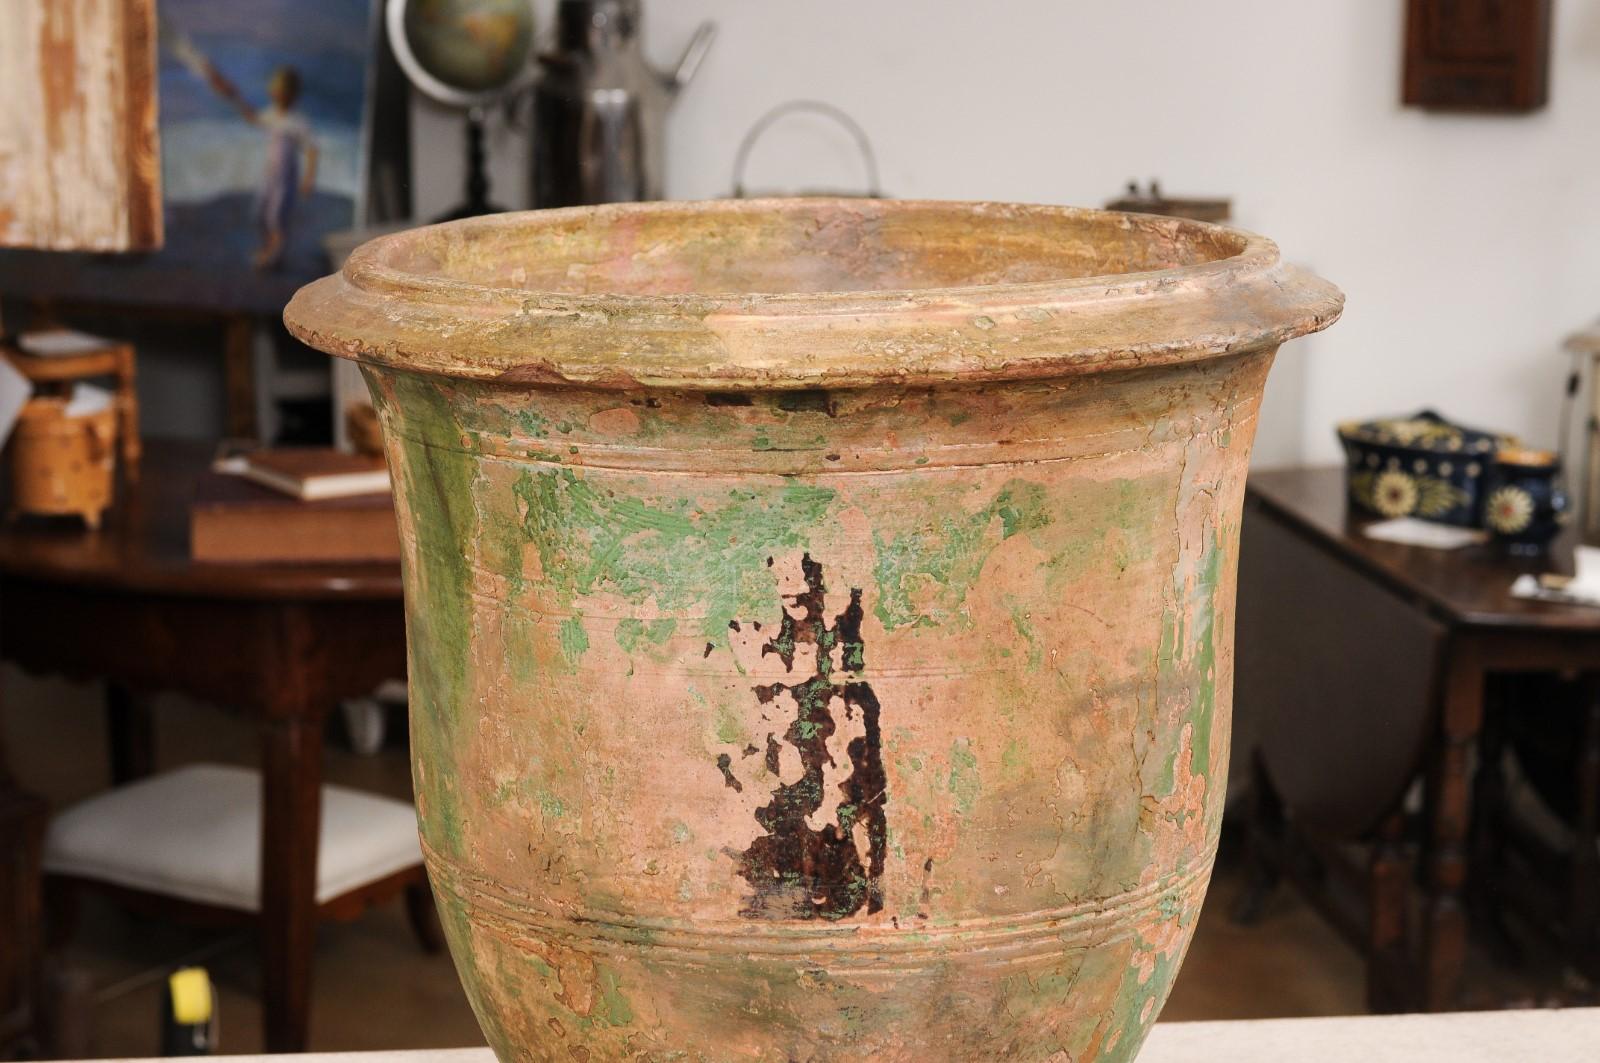 French Provençal Early 19th Century Anduze Vase with Hints of Green and Brown In Good Condition For Sale In Atlanta, GA